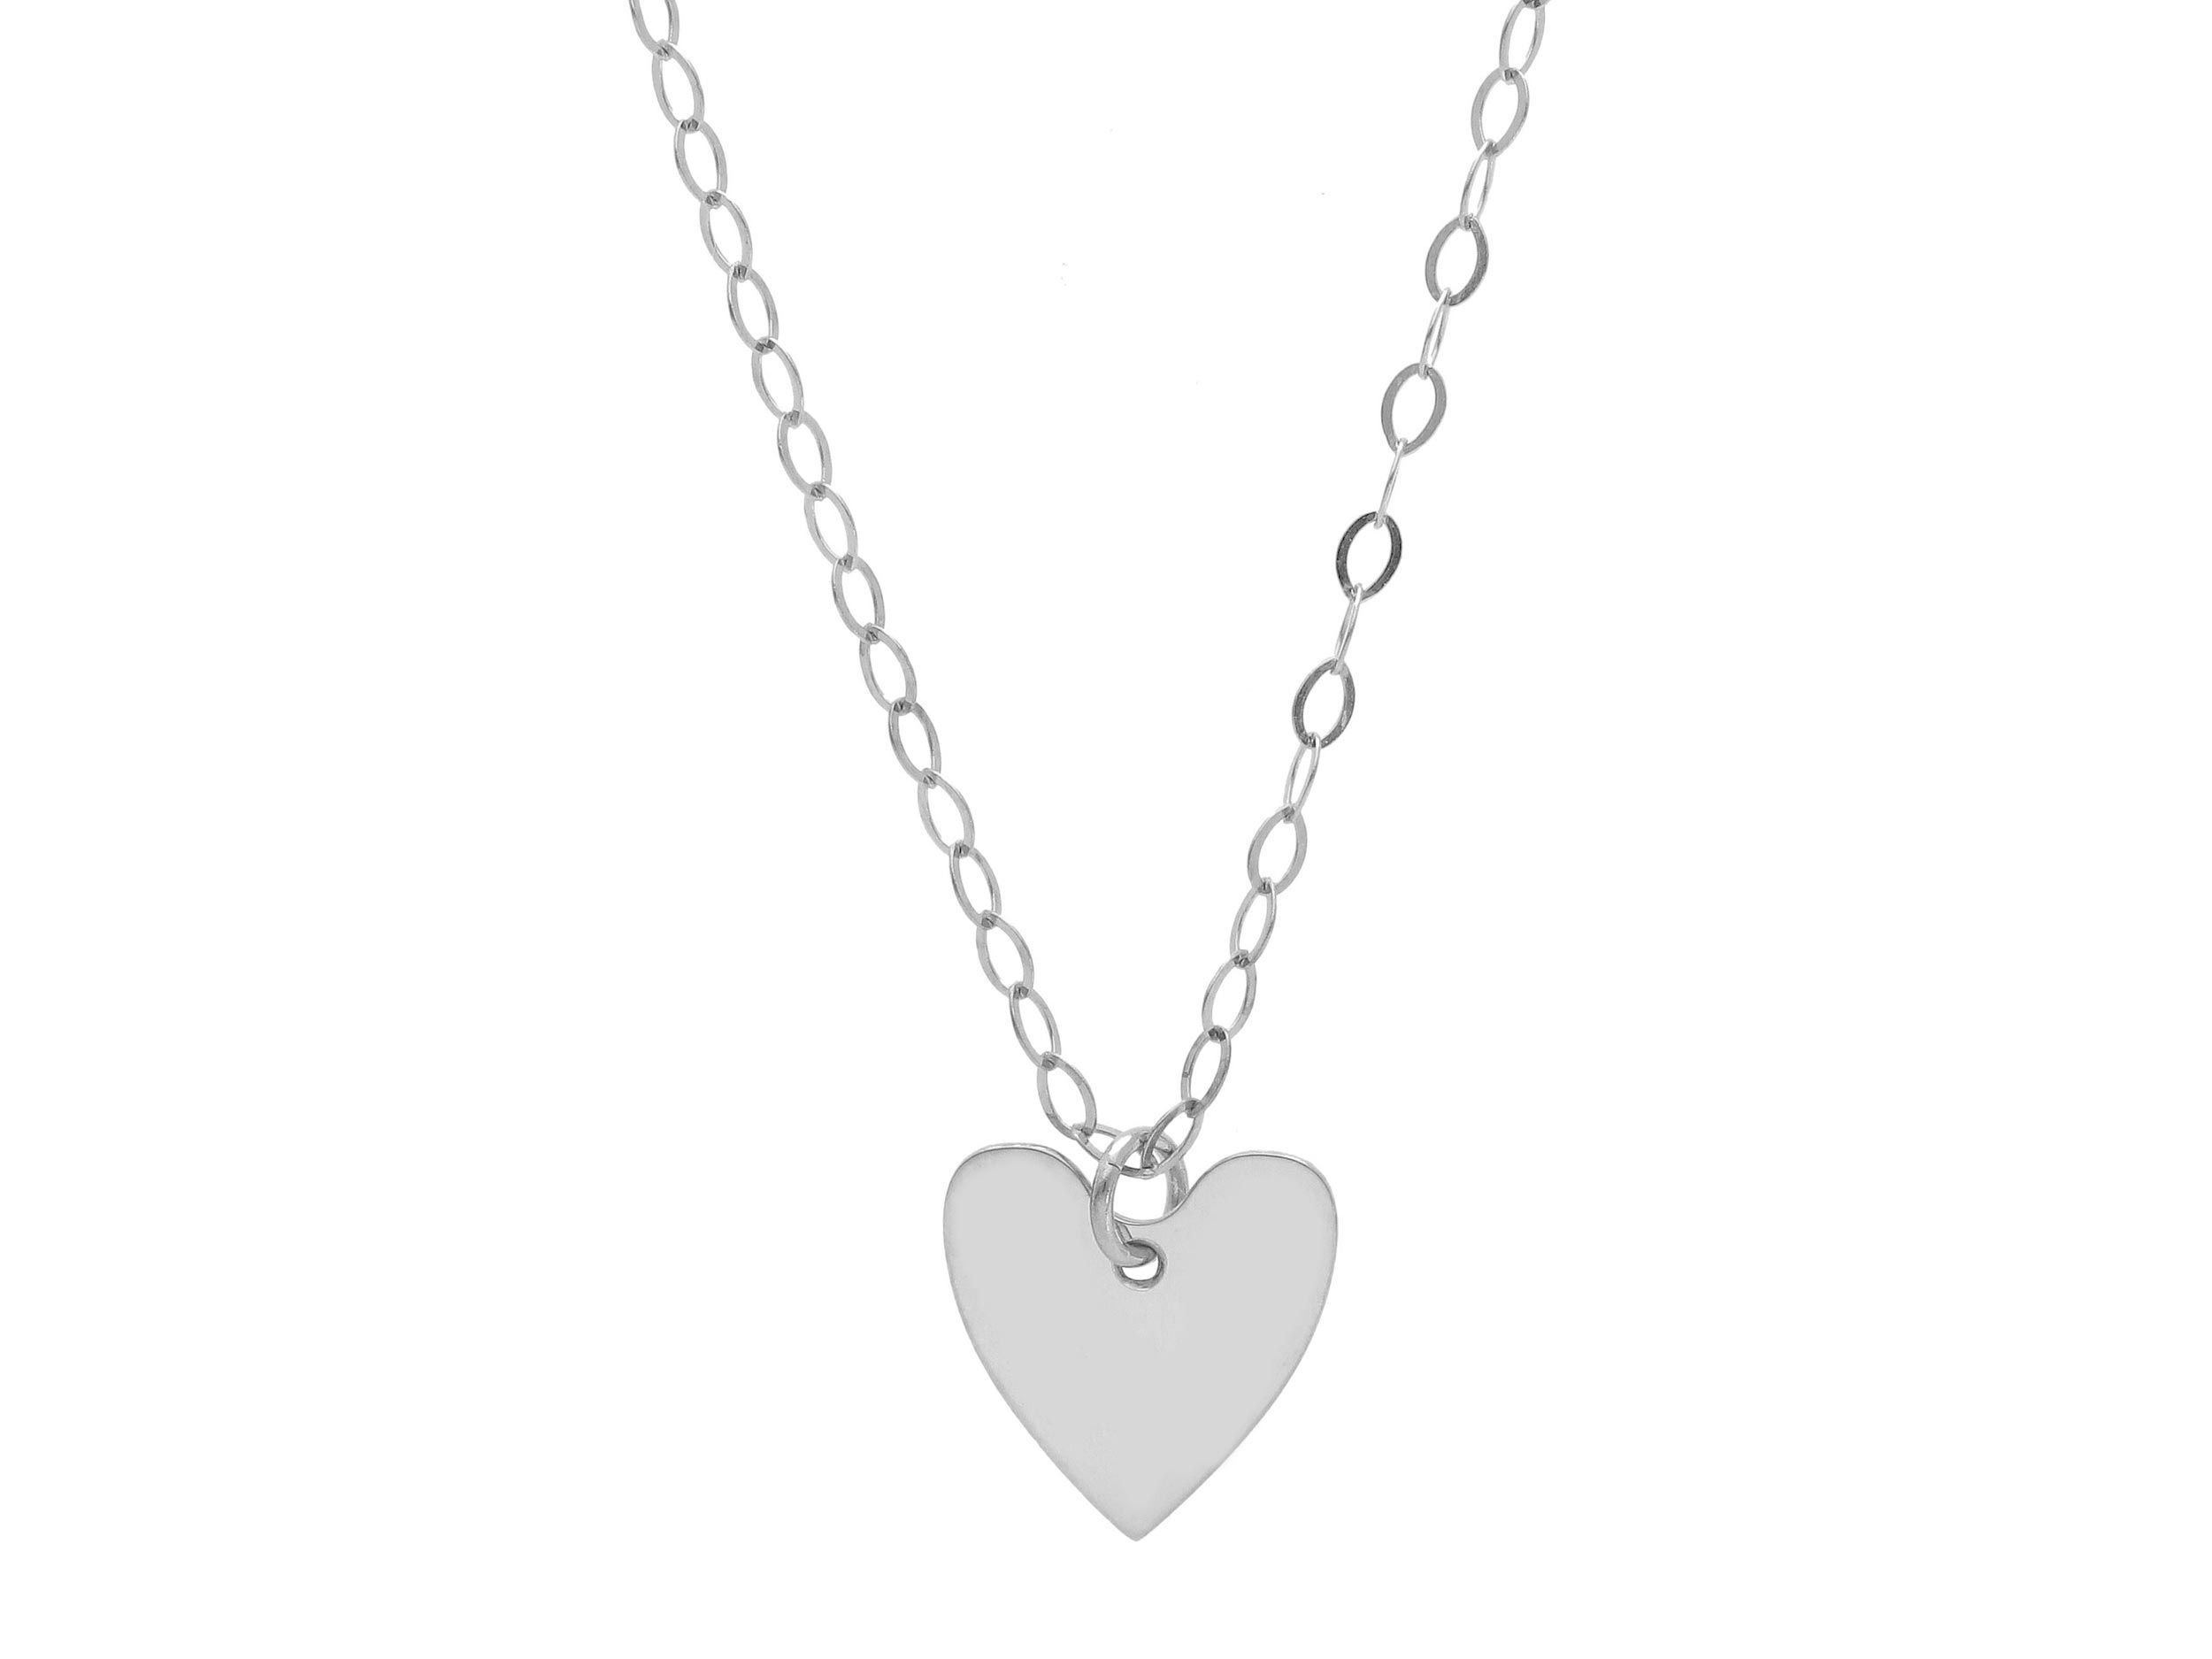 White gold heart shaped necklace k9 (code S225733)